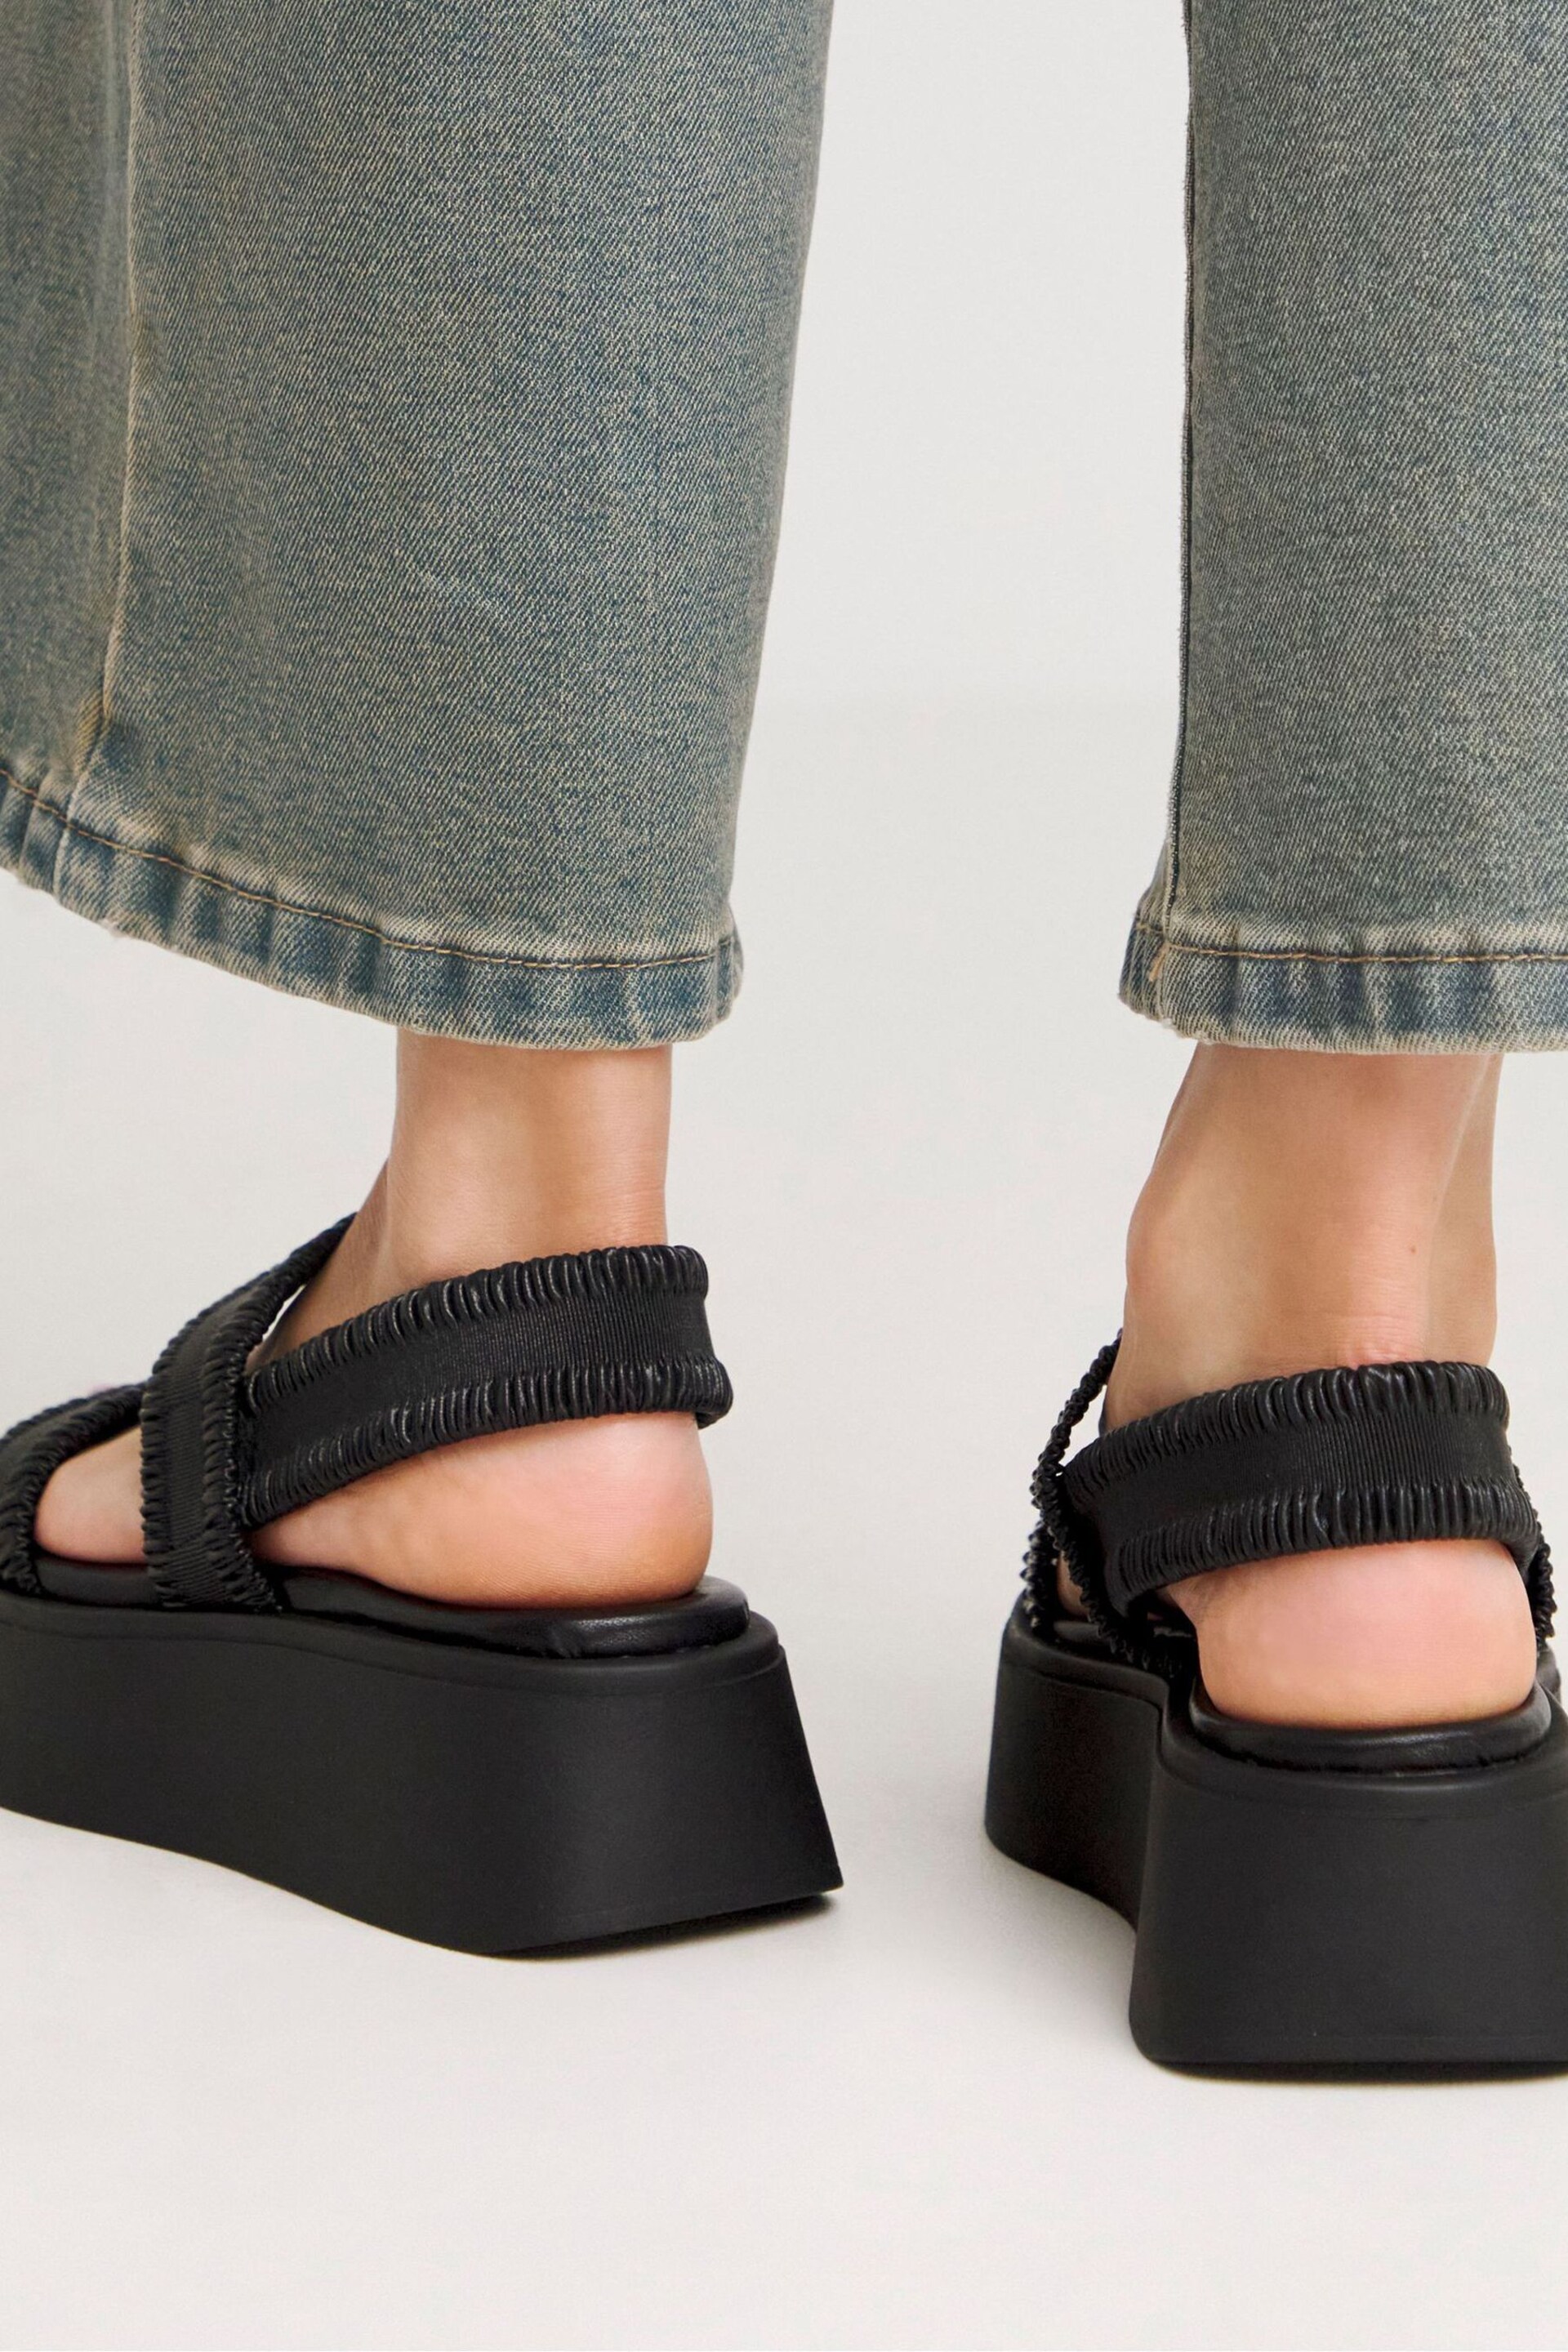 Simply Be Black Stretched Ruched Strappy Flatform Sandals in Wide Fit - Image 2 of 4